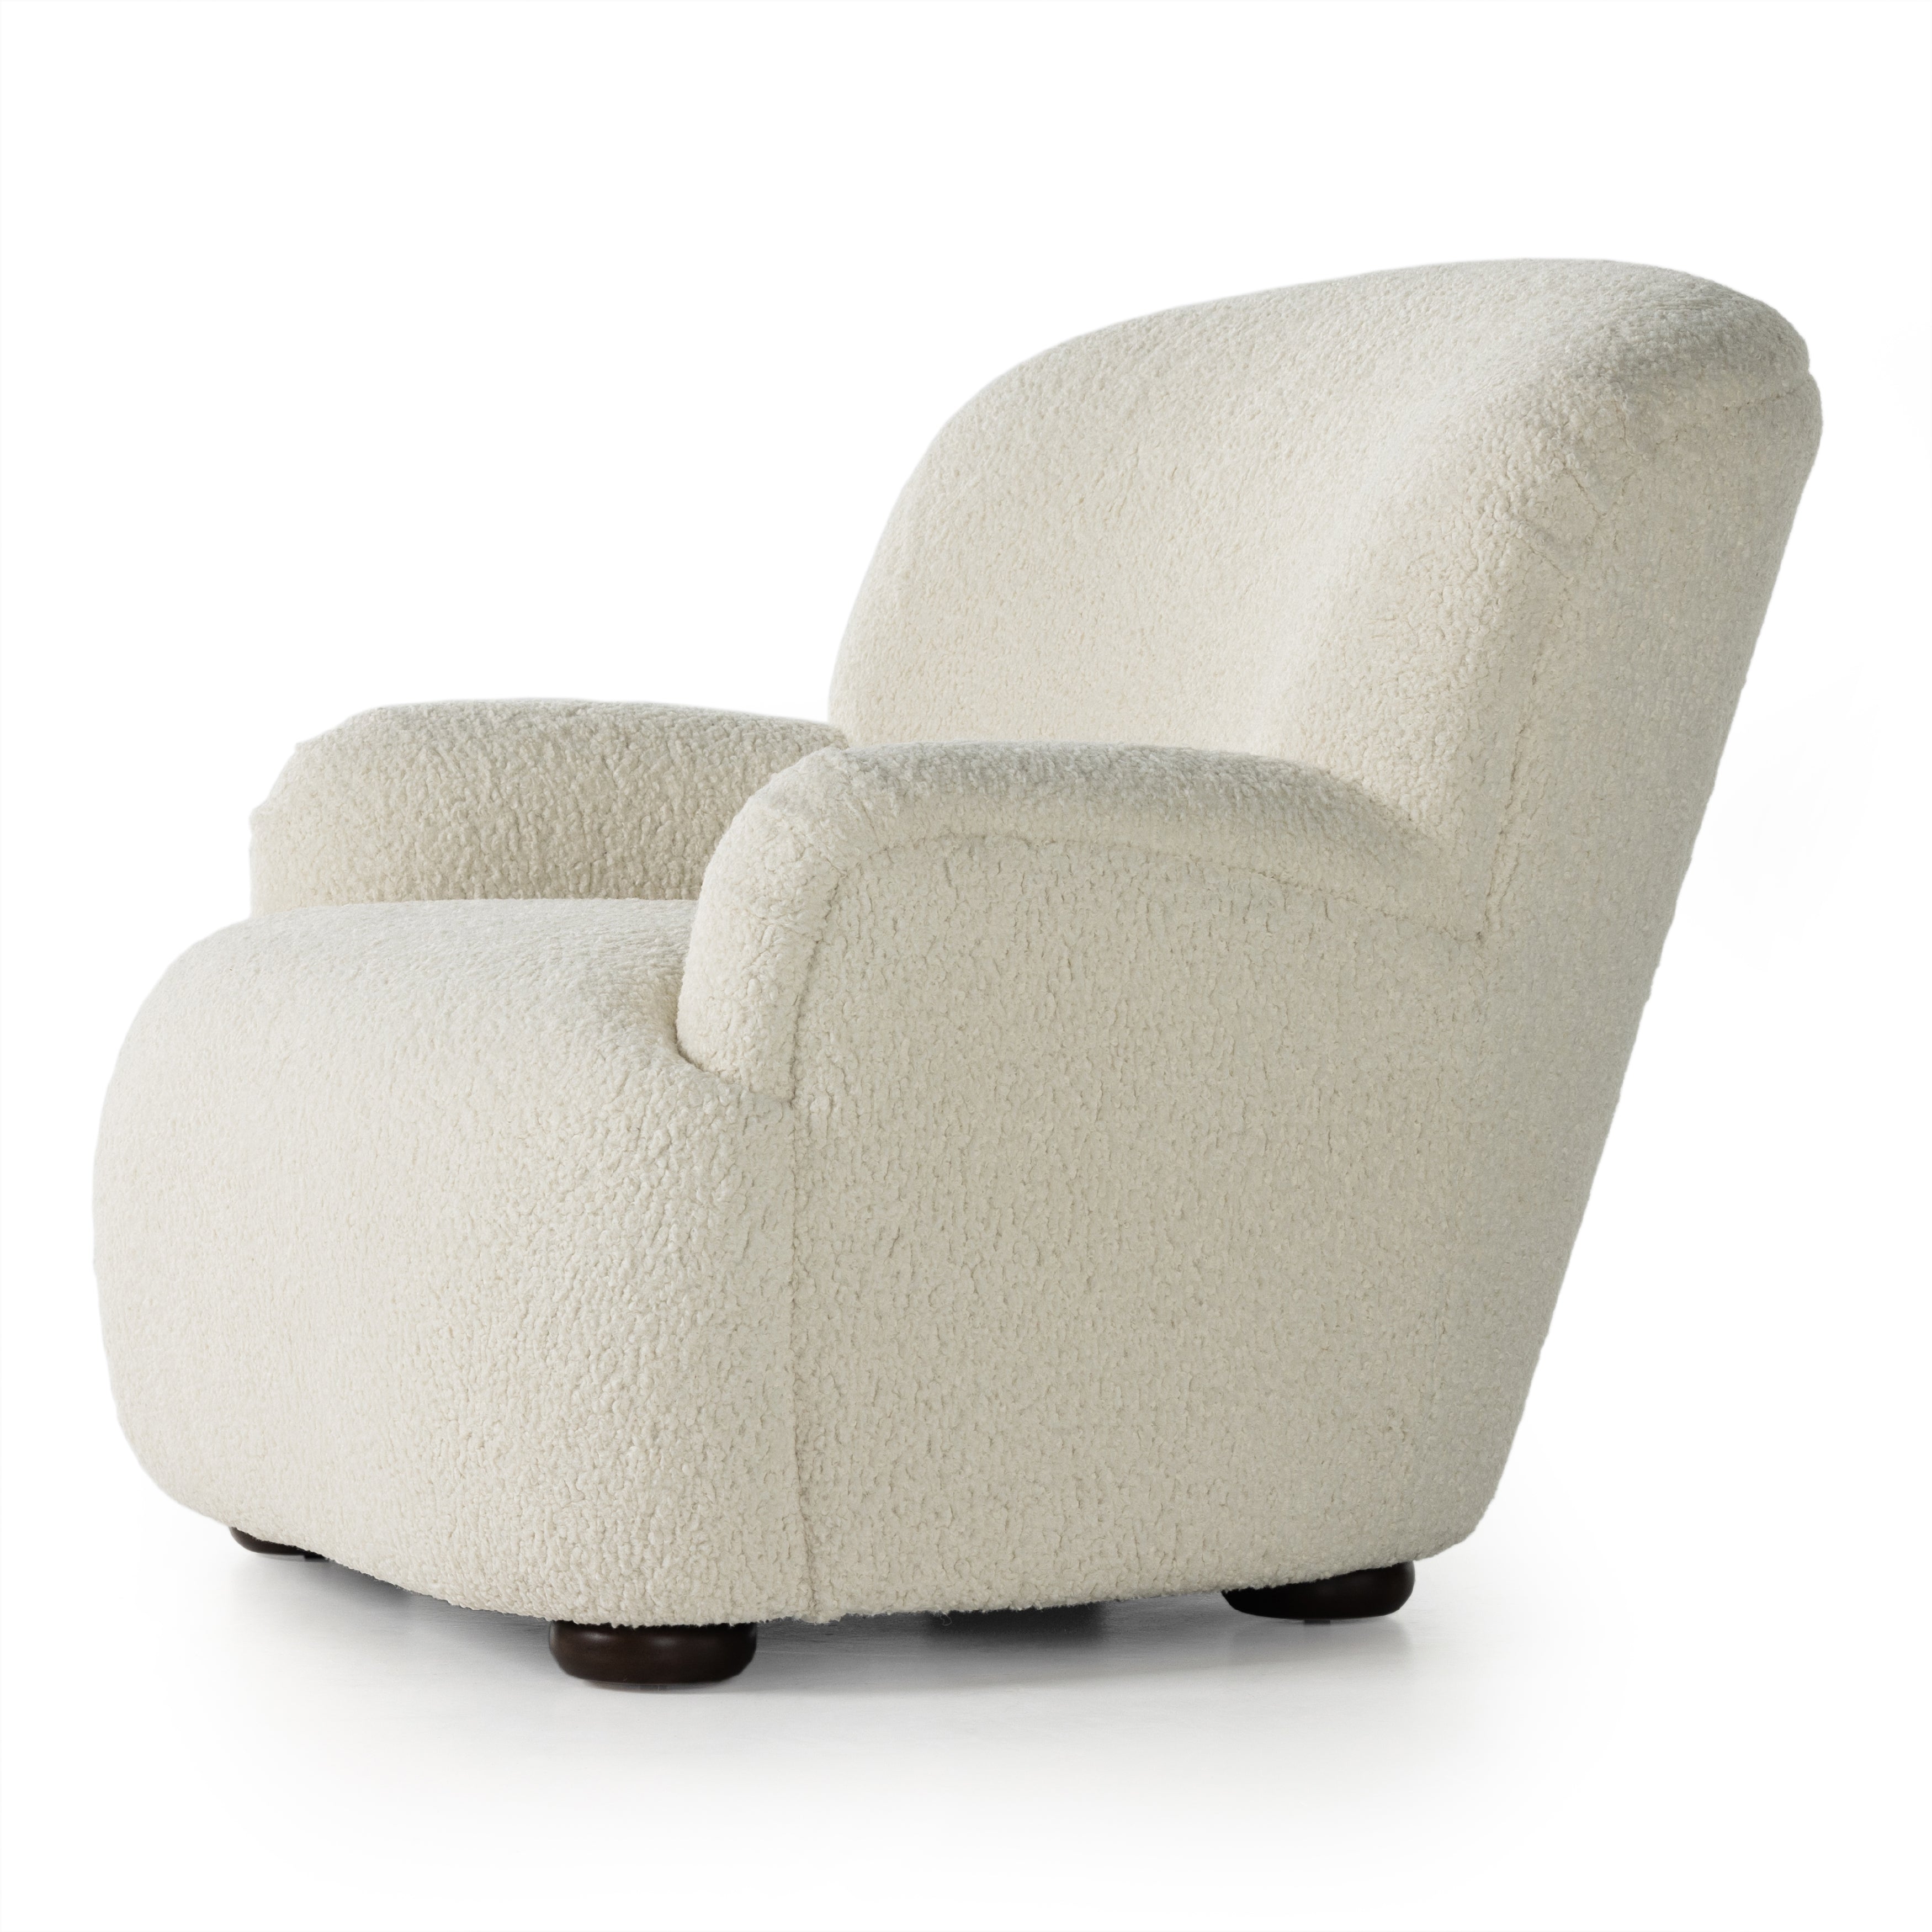 Kadon Sheepskin Natural Chair's high wing back pairs with softly rolled arms for a curvy look and supportive sit. Cream shearling-like upholstery invites you to sit and stay a while Amethyst Home provides interior design services, furniture, rugs, and lighting in the Omaha metro area.